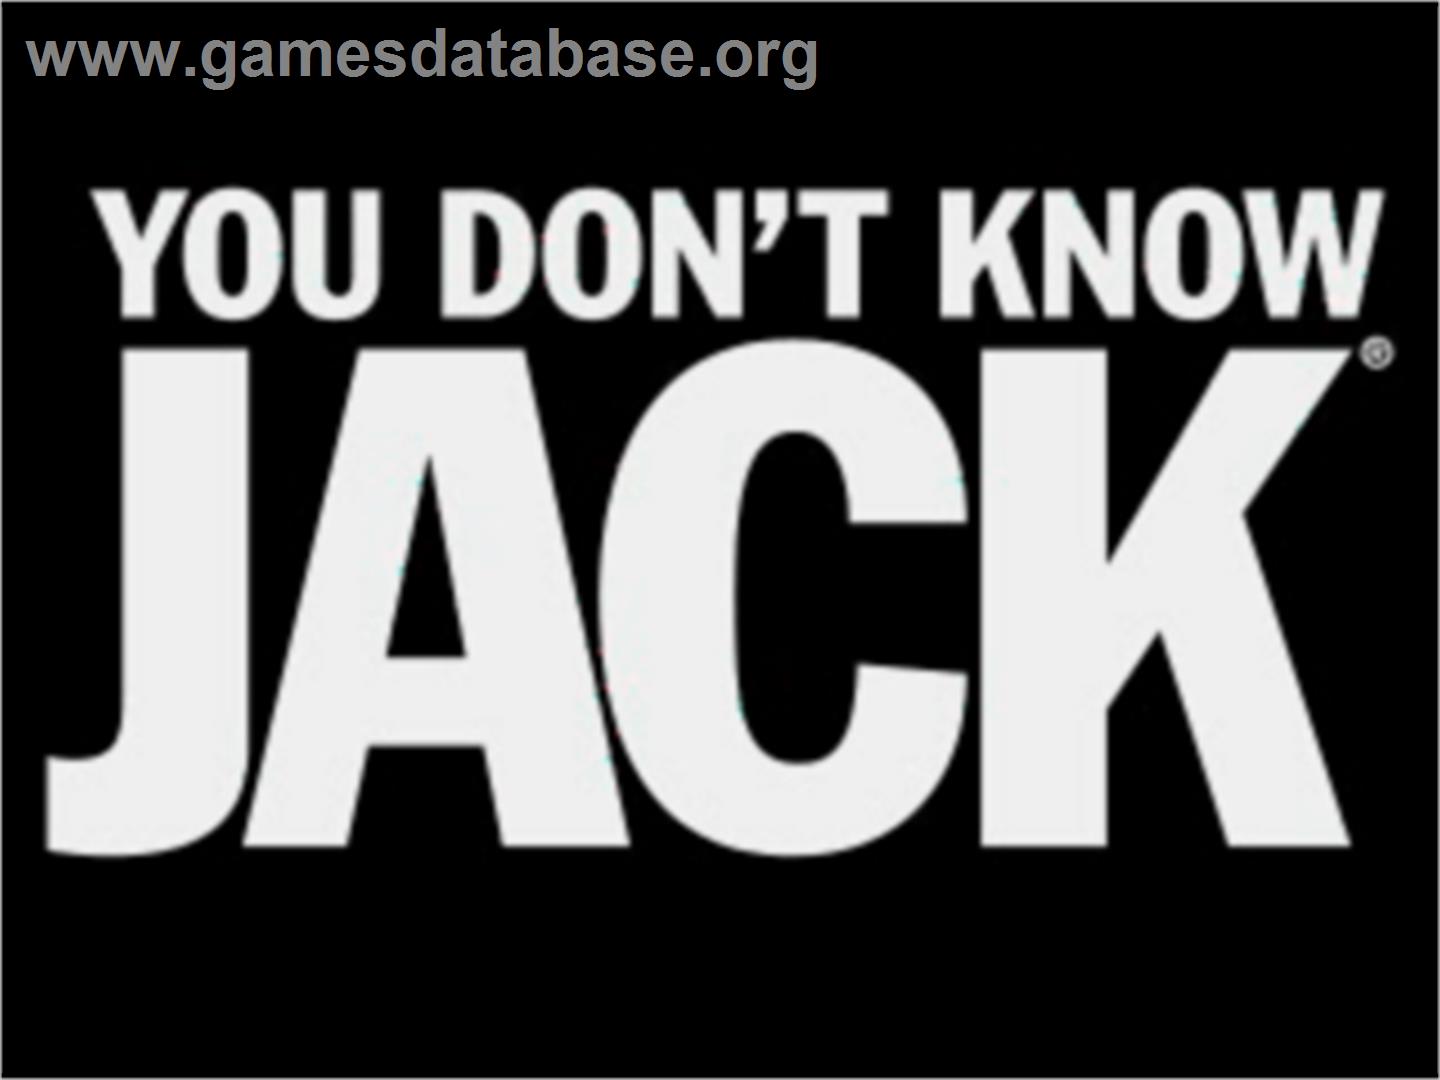 You Don't Know Jack - Sony Playstation - Artwork - Title Screen